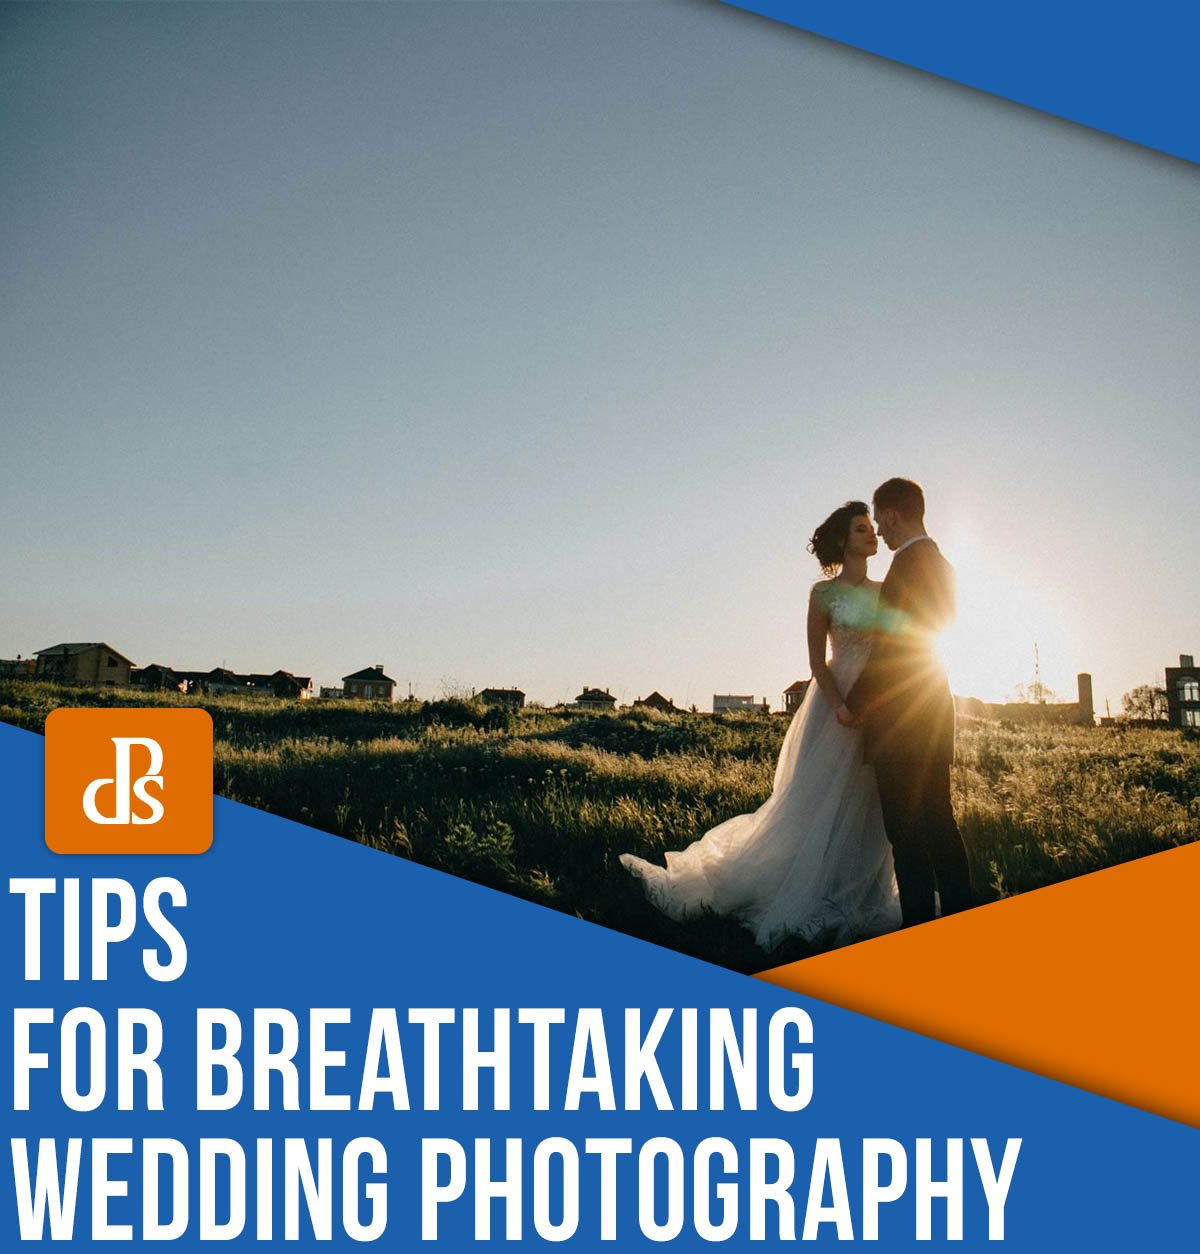 Tips for breathtaking wedding photography